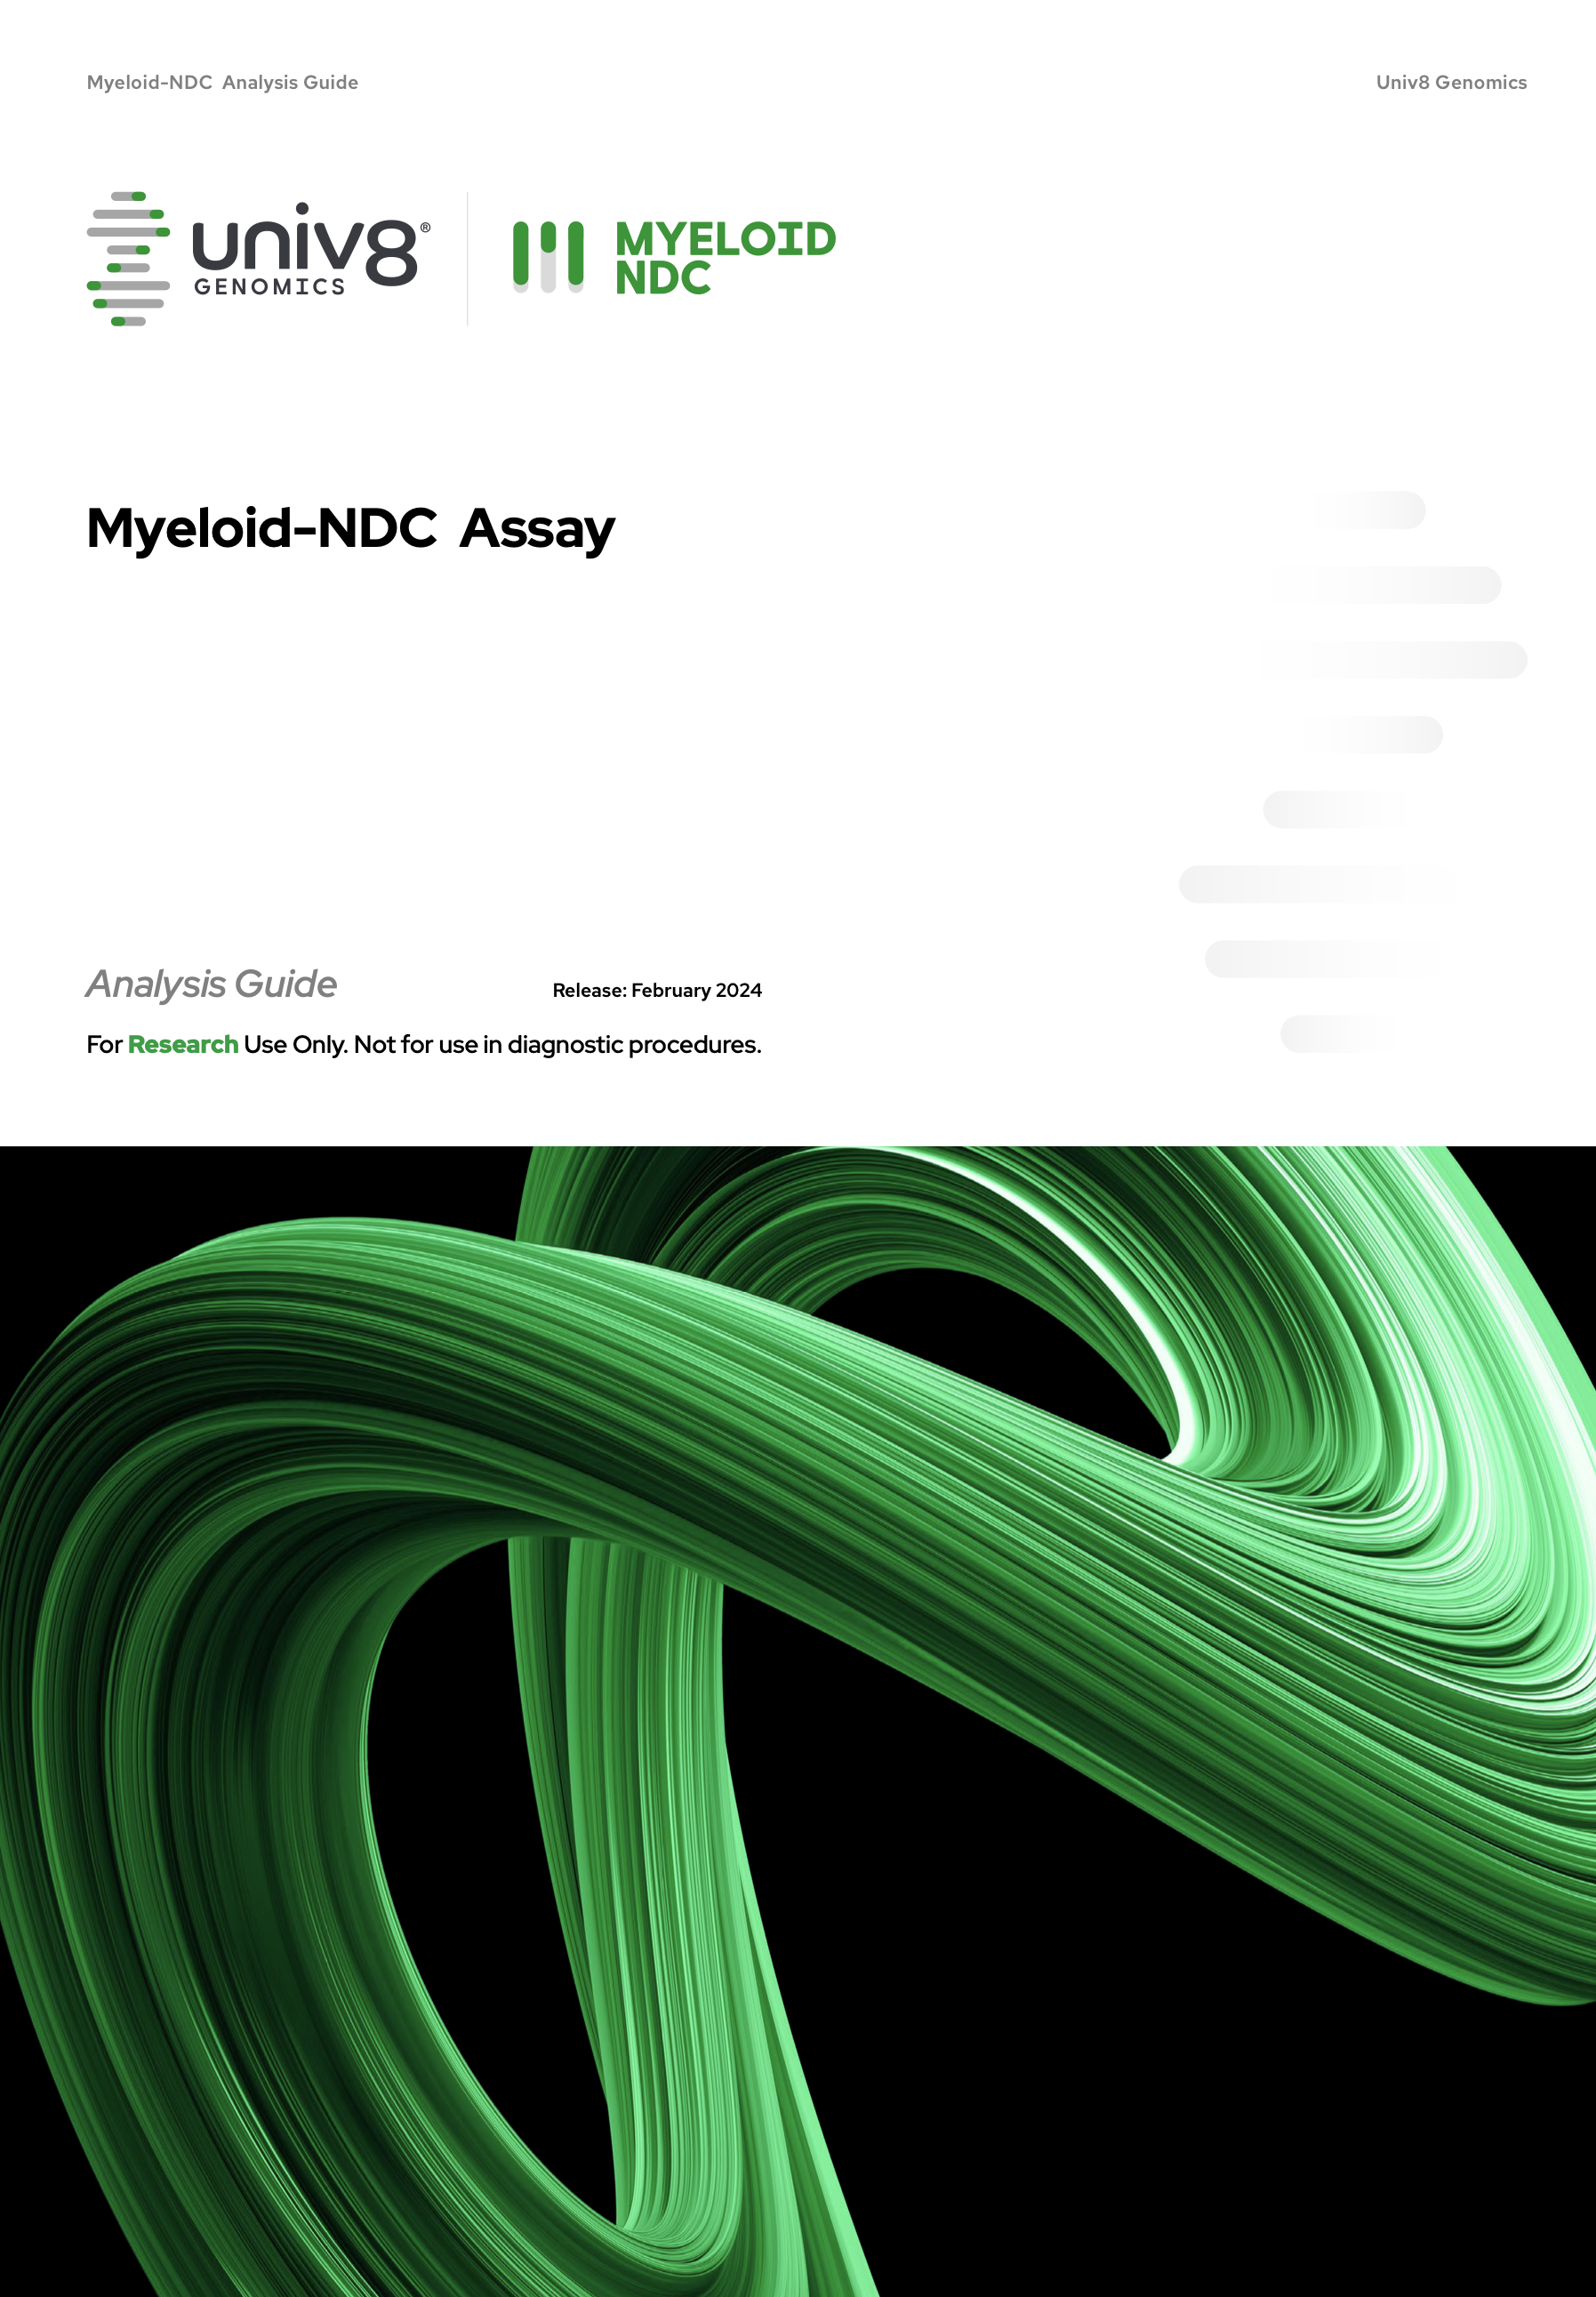 Cover of Myeloid-NDC Analysis Guide